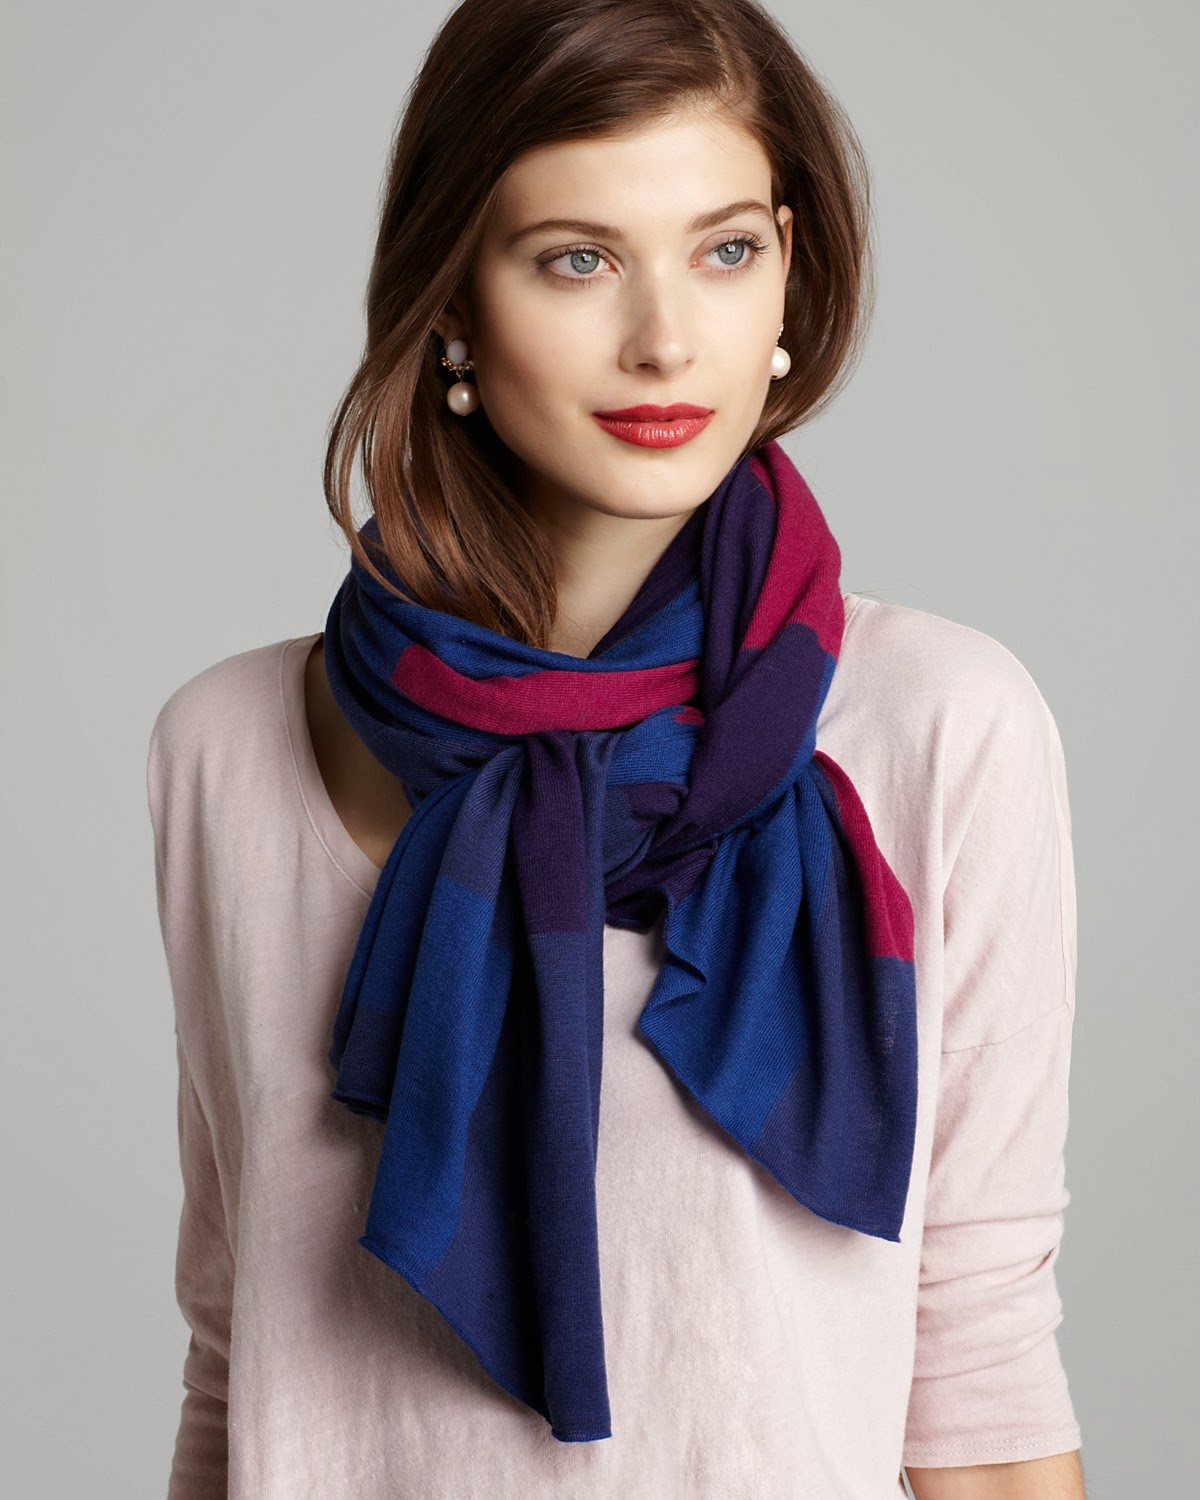 Scarf Styles: Winter Scarf Tying Fashion - Top Fashion and Beauty ...